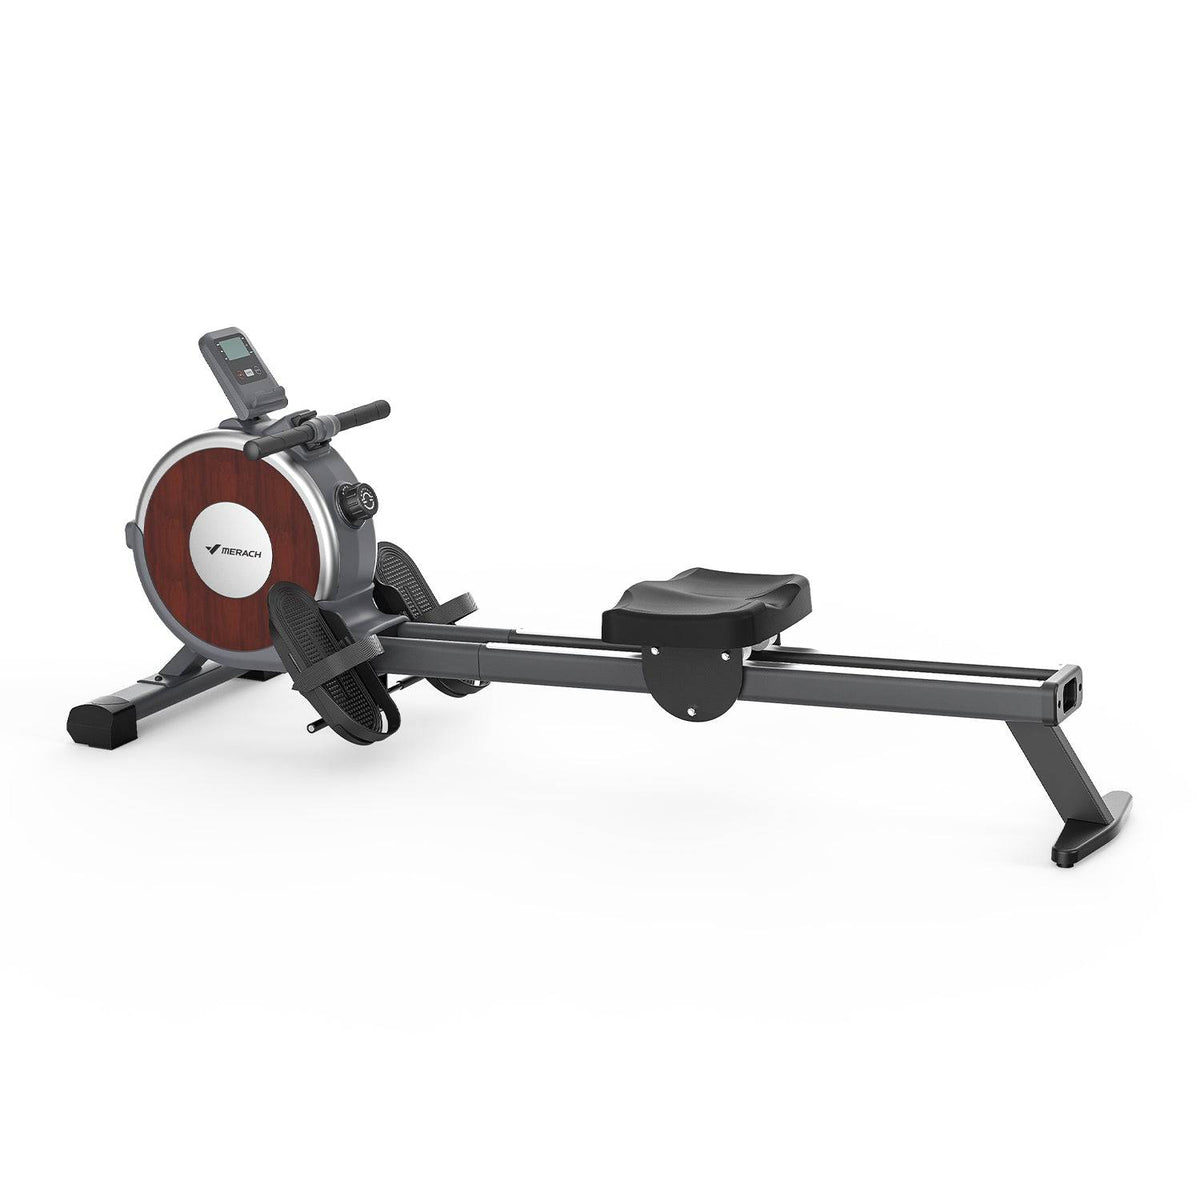 MERACH - Q1S Manual Resistance Rower